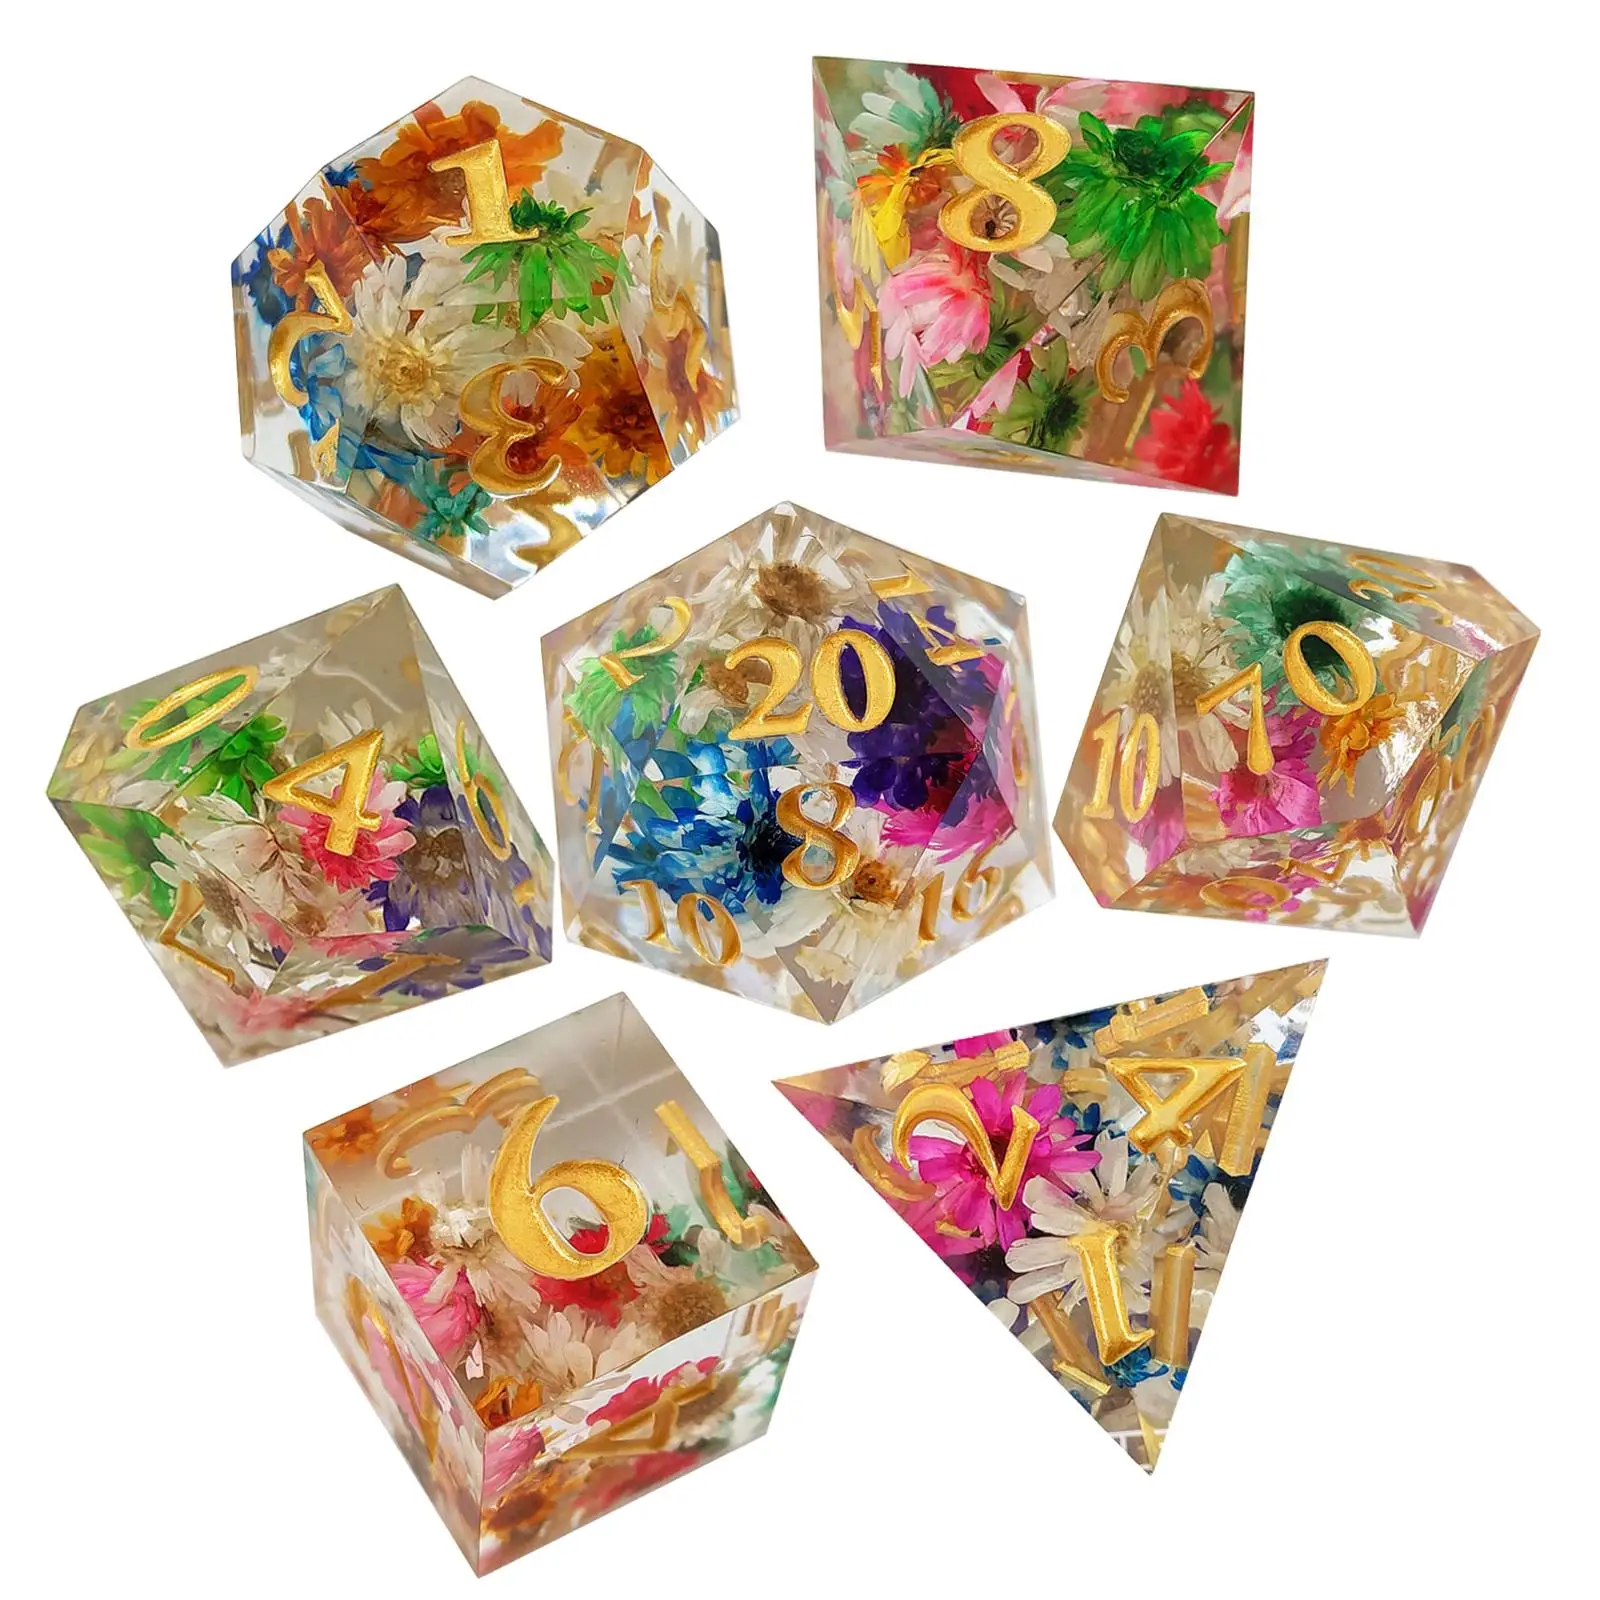 7 Pieces Polyhedral Dices Set Toys Transparent Flower Durable Portable Engraved Rolling Dices for Table Games Board Game Props